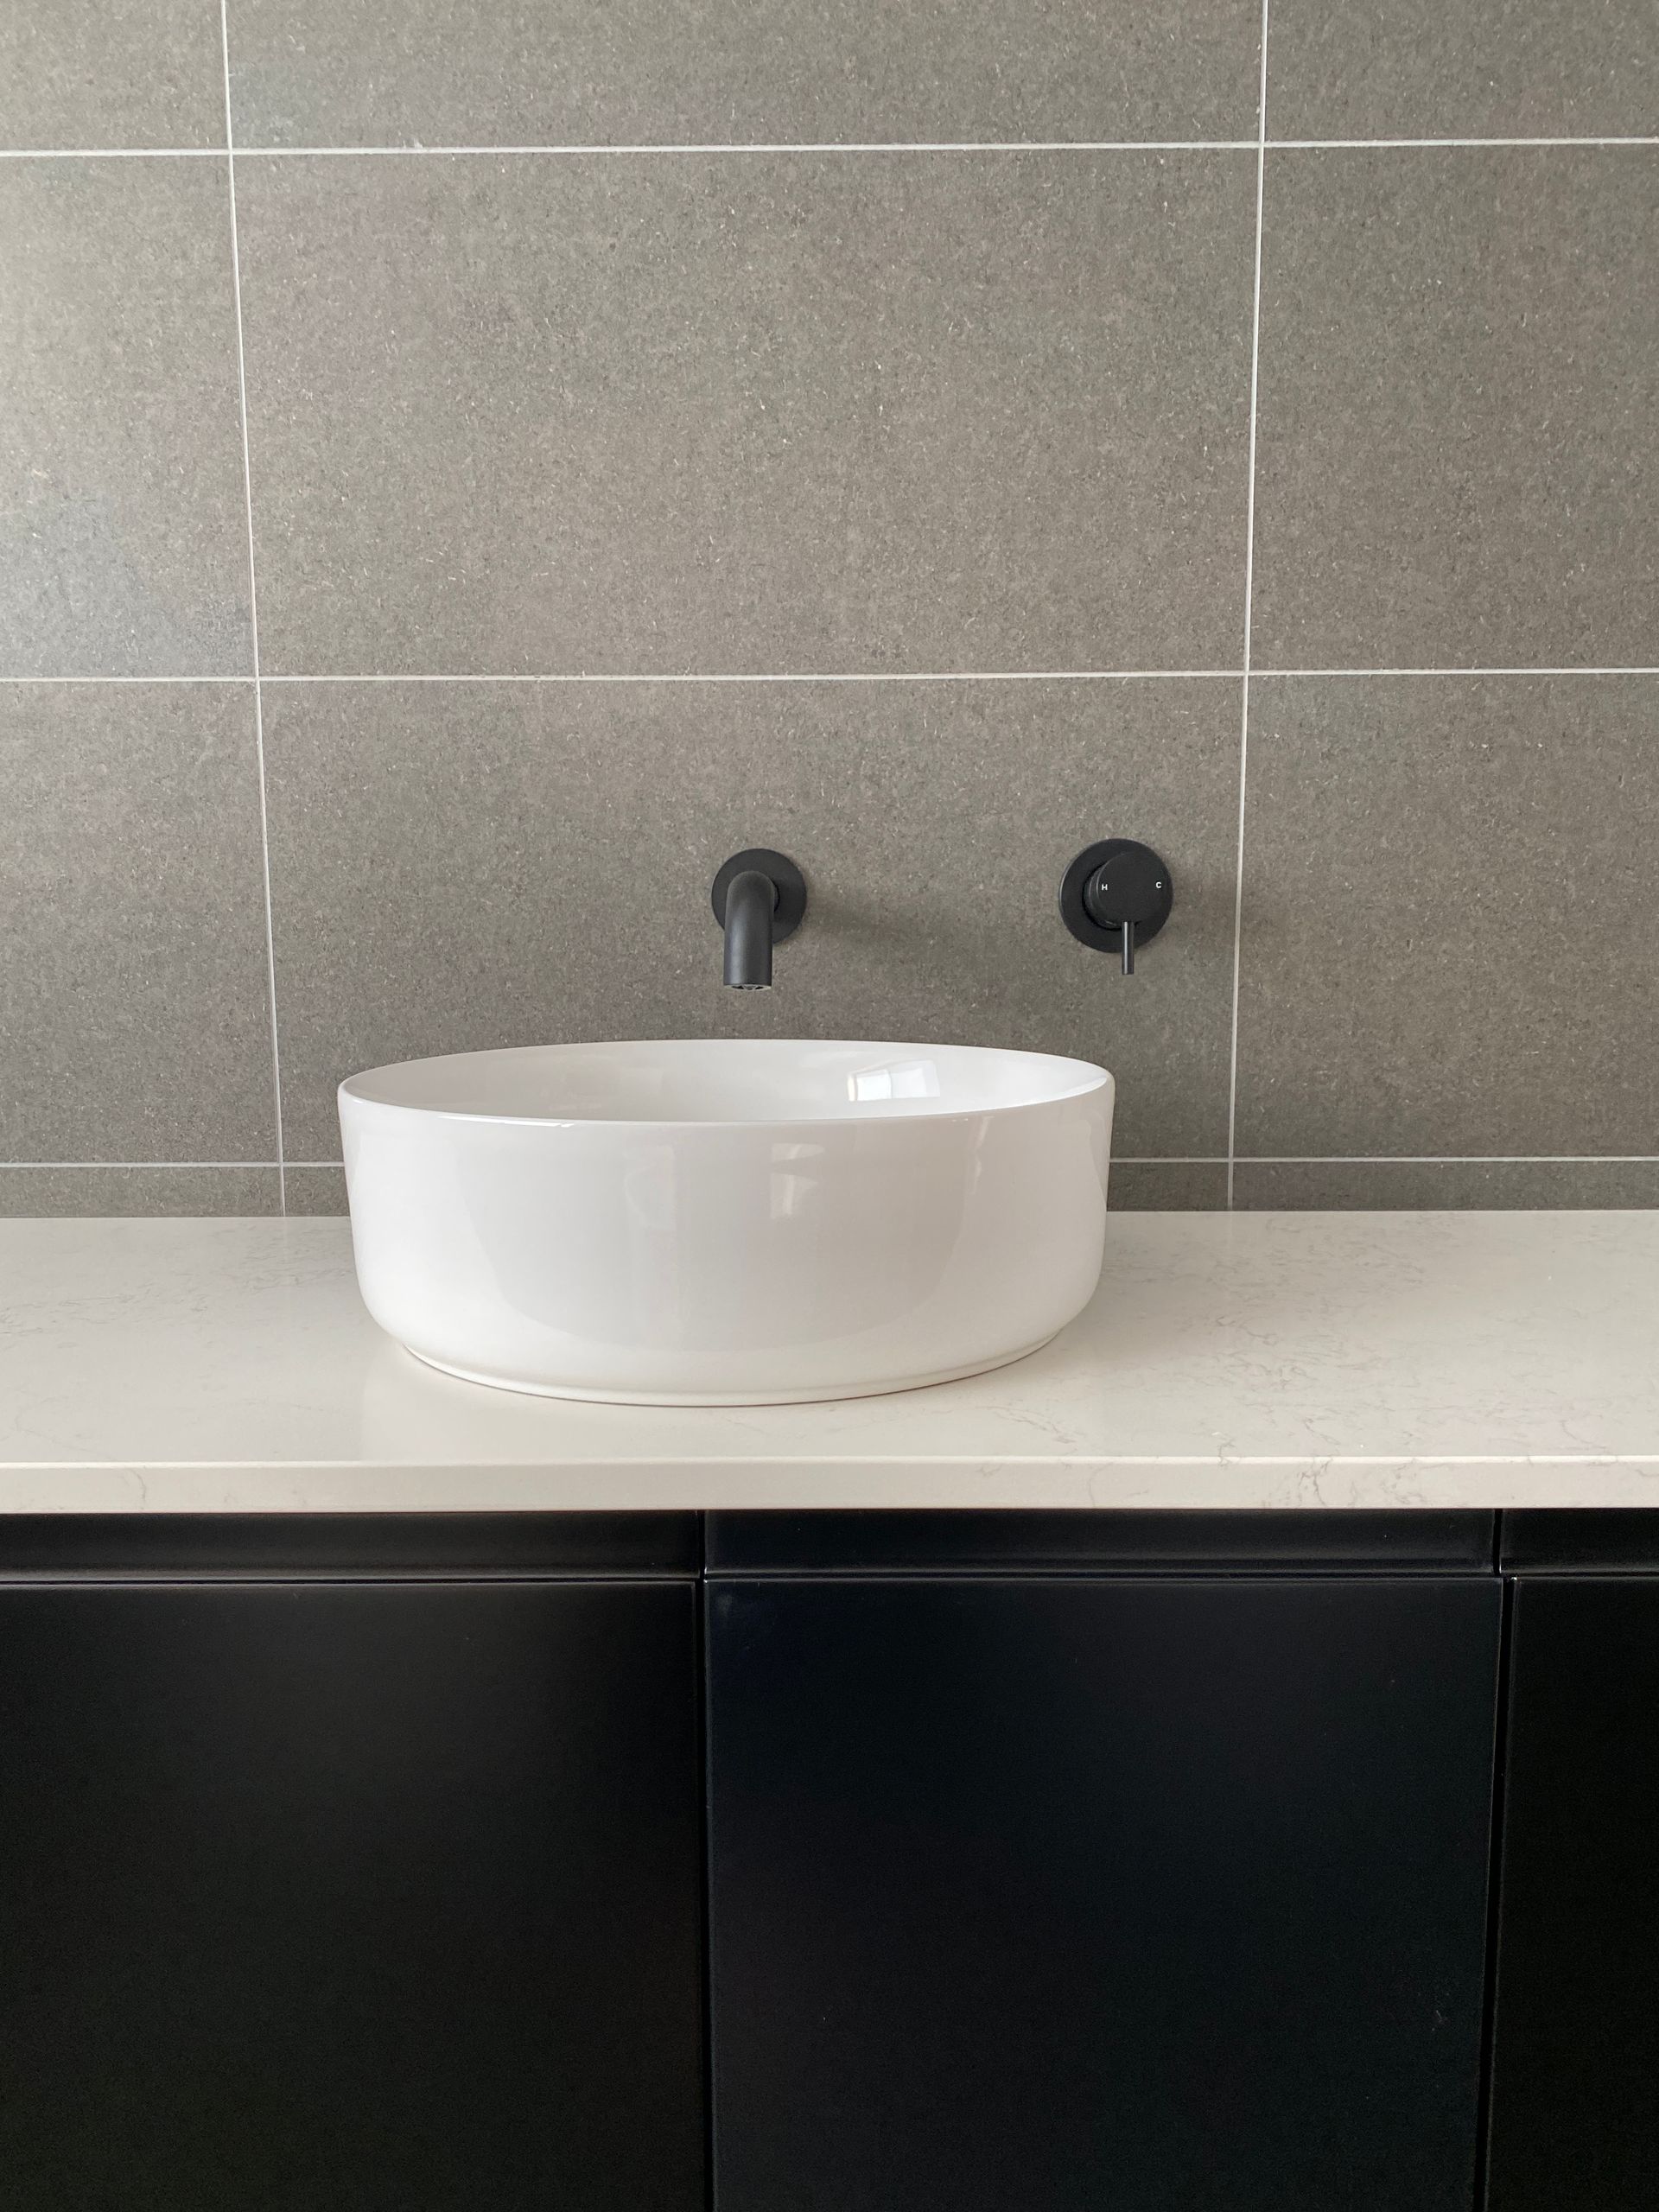 White Round Washbasin With Balck Faucet — Kitchen Renovations in Dubbo, QLD